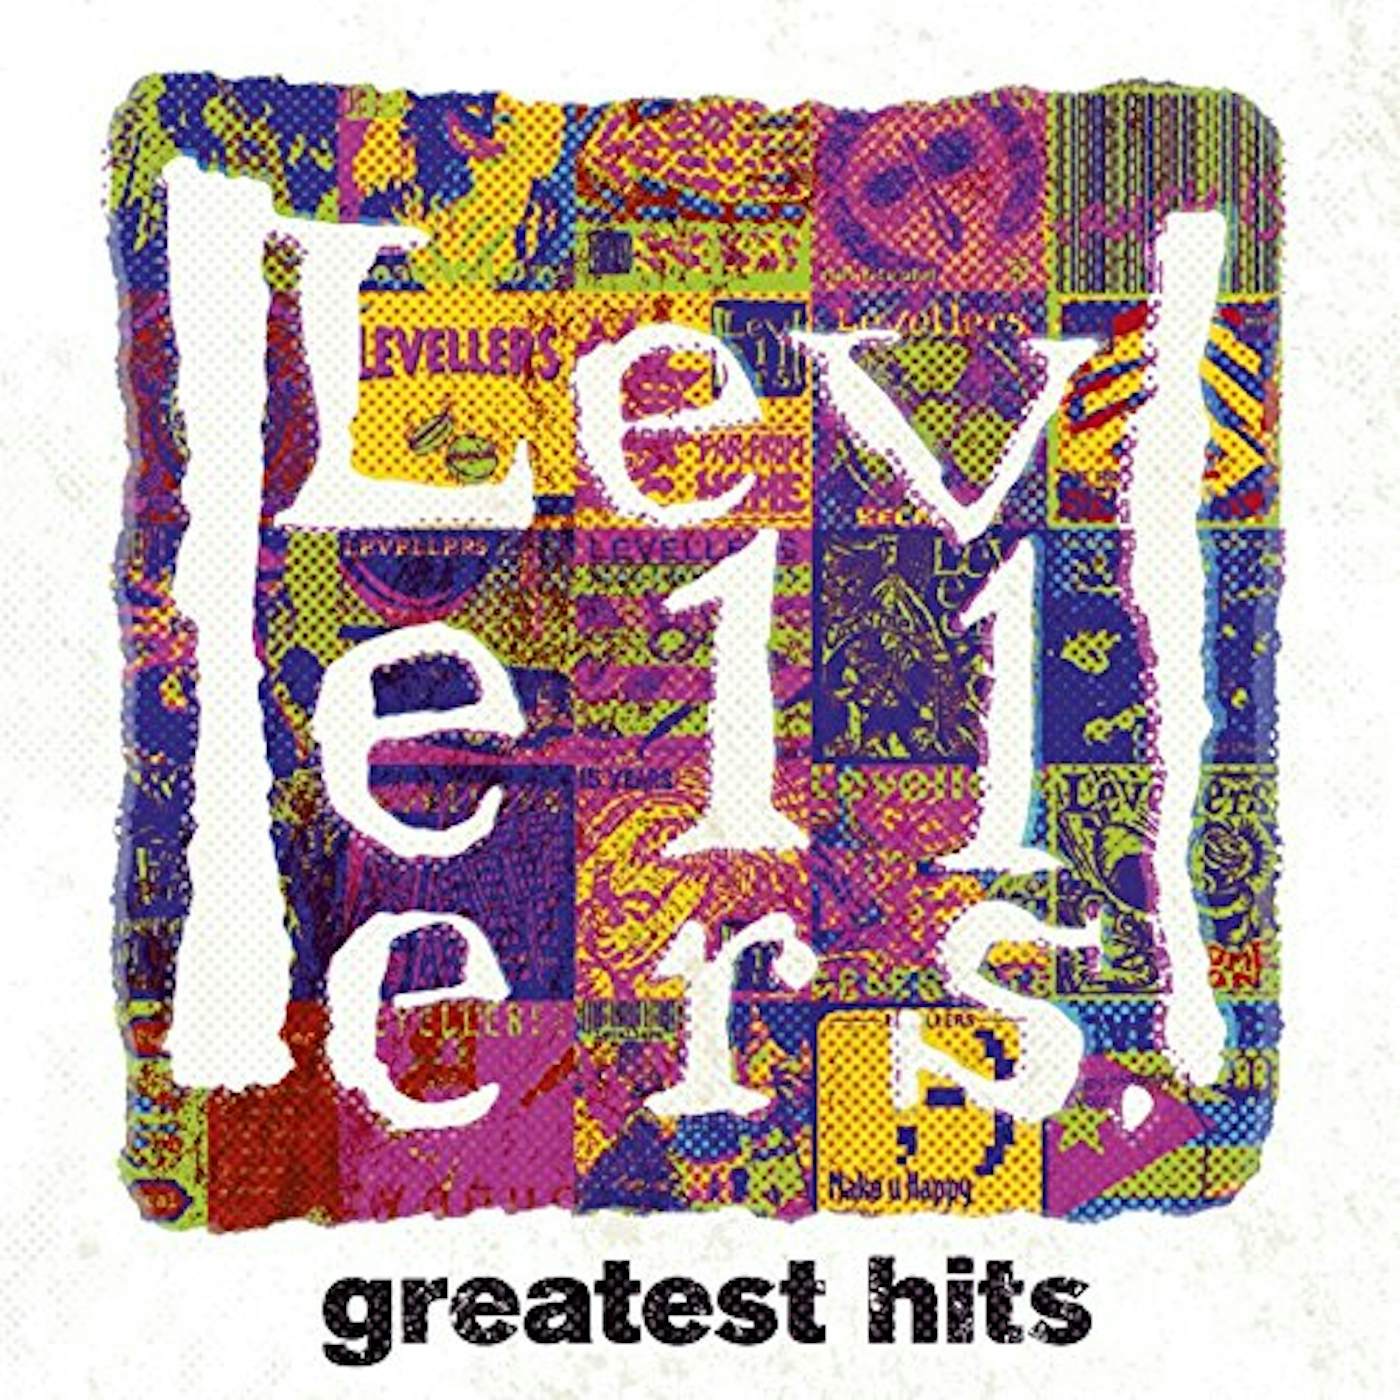 Levellers Greatest Hits Vinyl Record